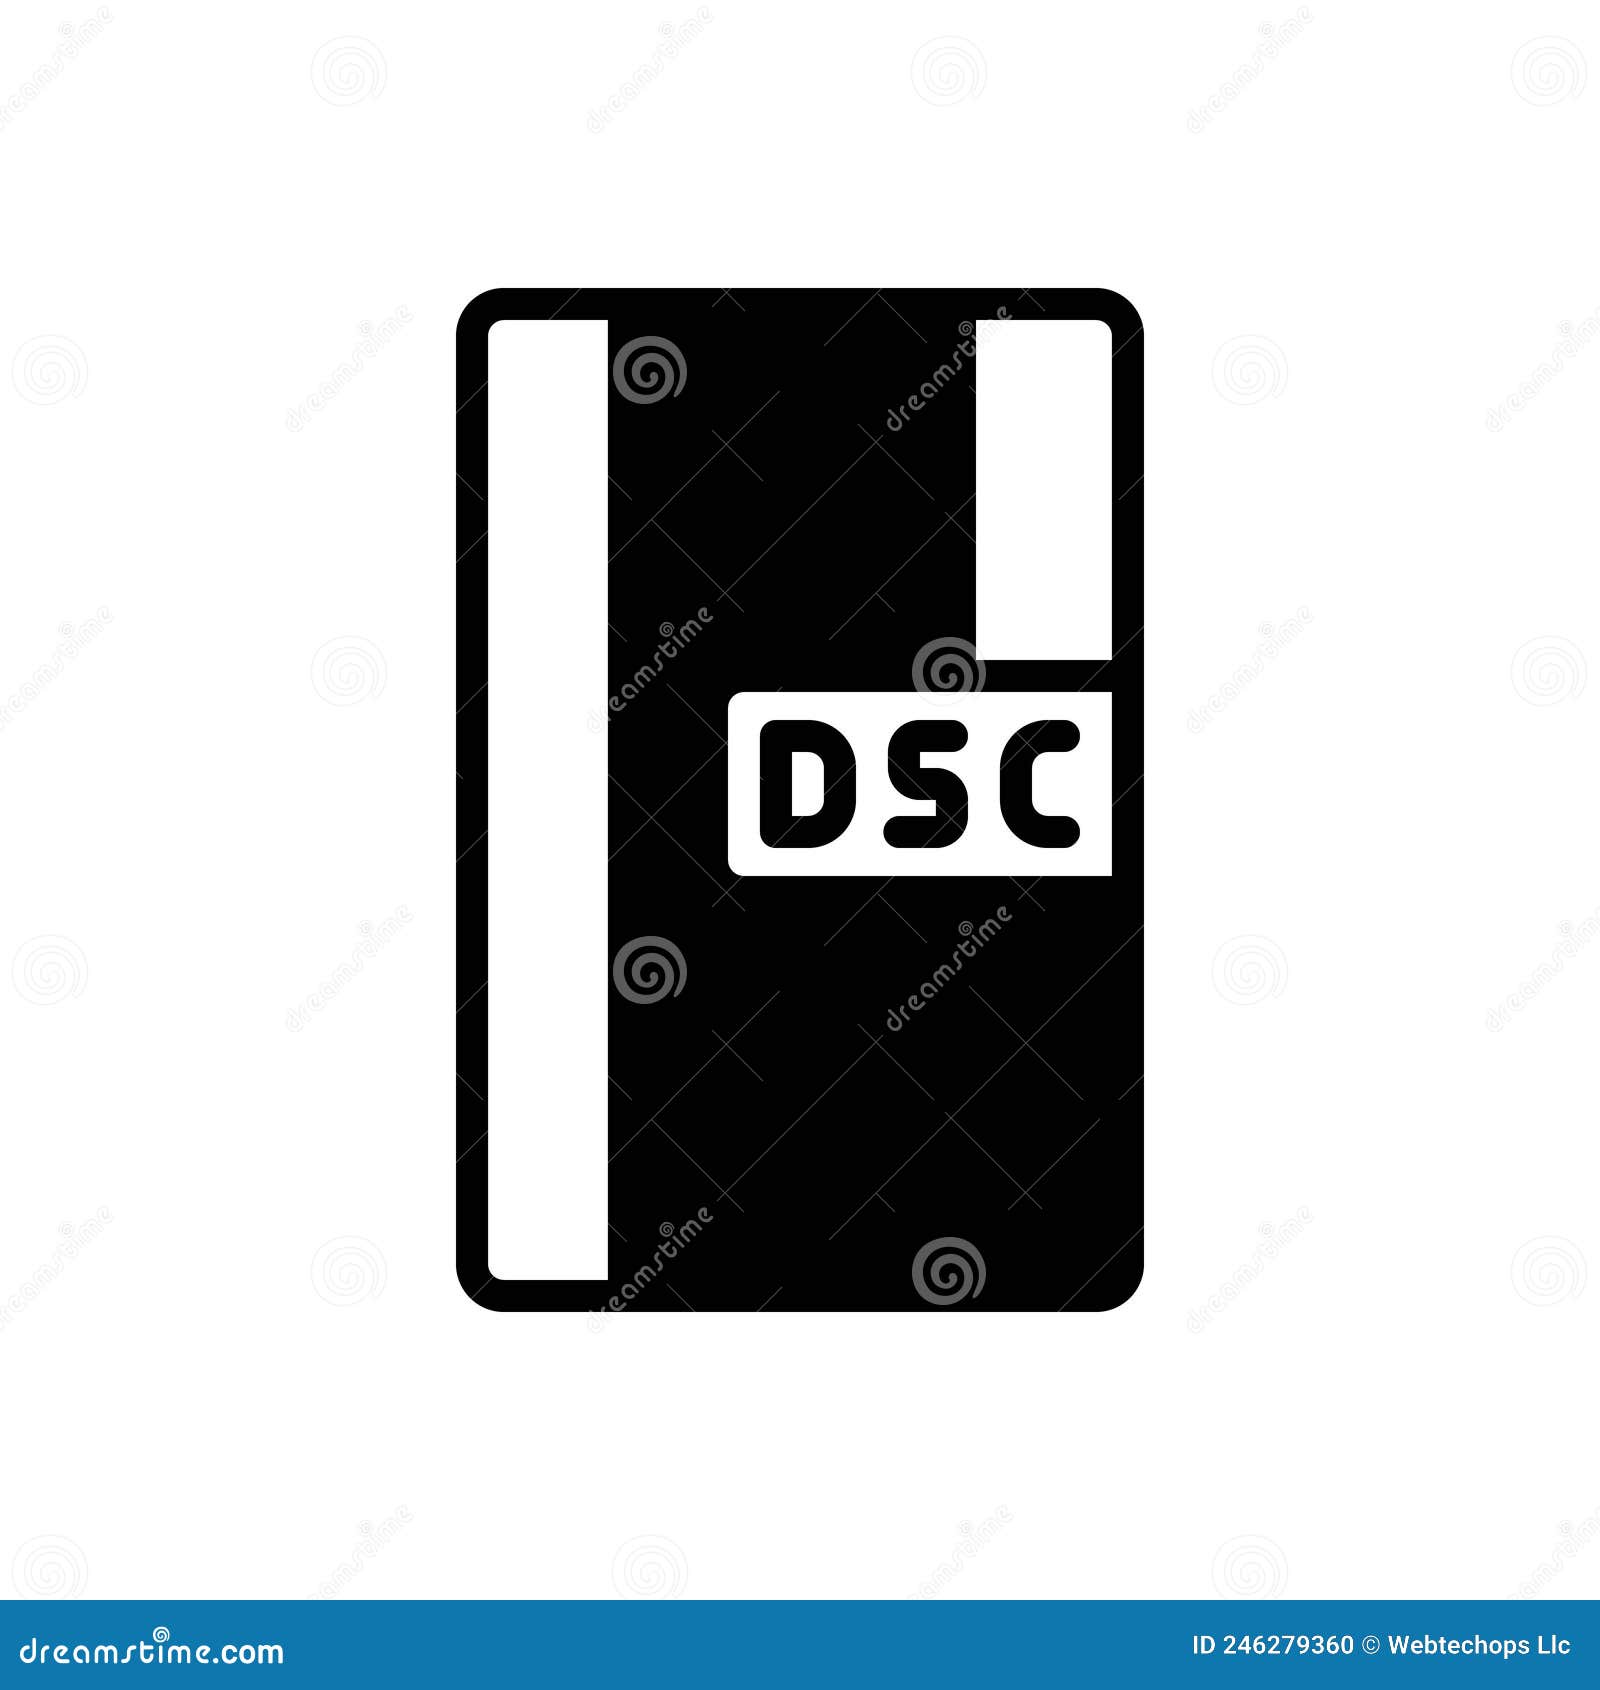 black solid icon for dsc, application and file